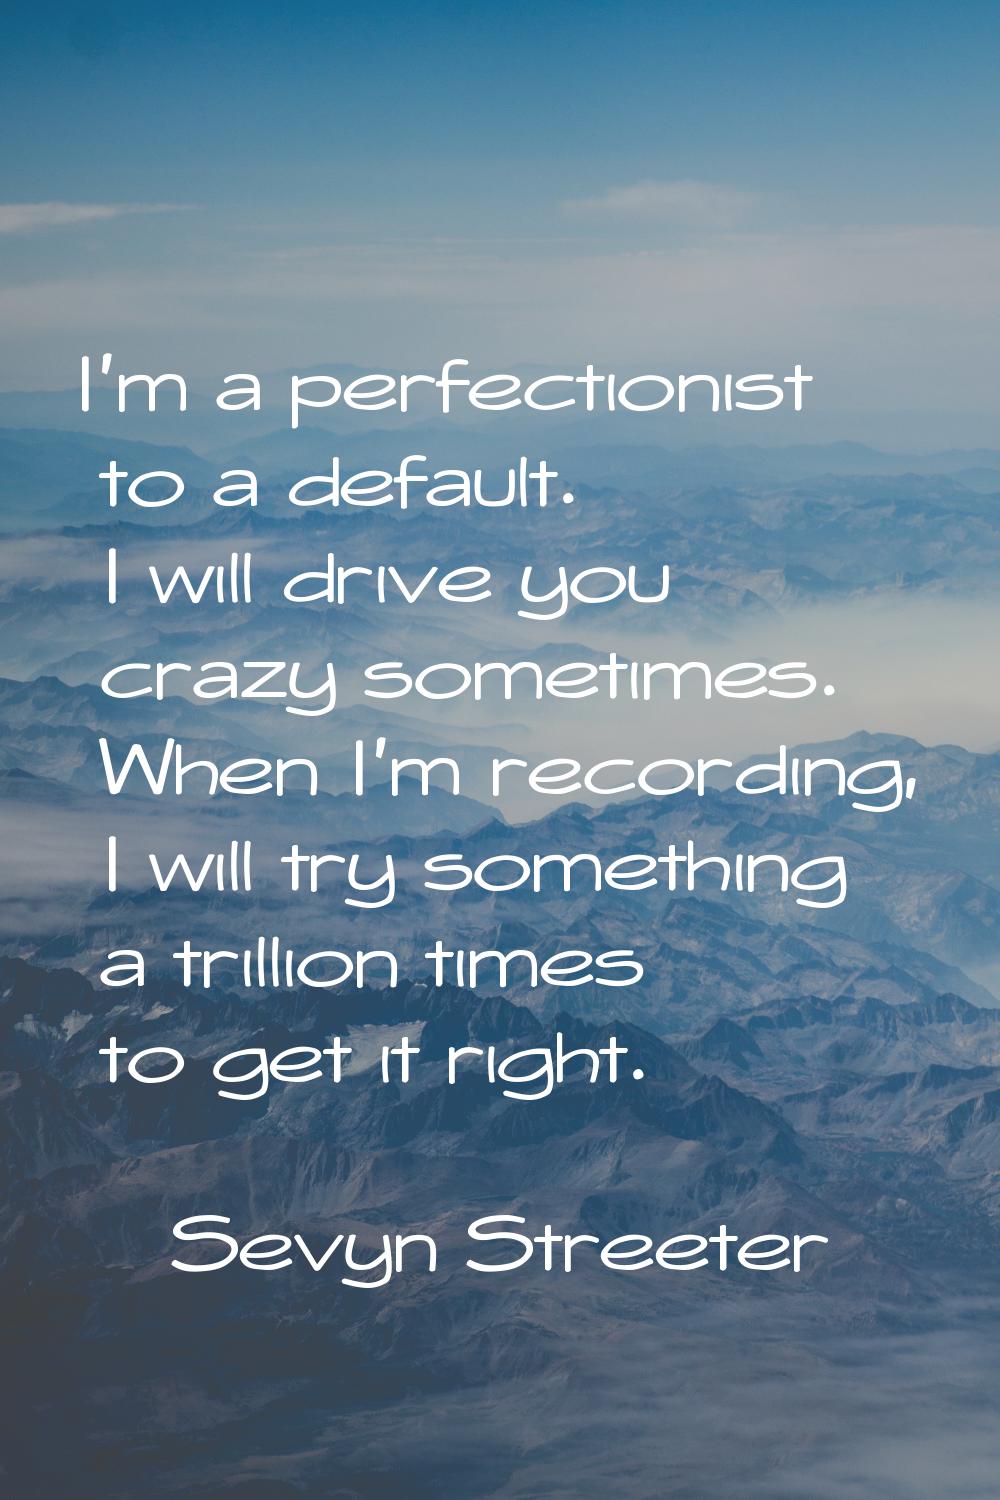 I'm a perfectionist to a default. I will drive you crazy sometimes. When I'm recording, I will try 